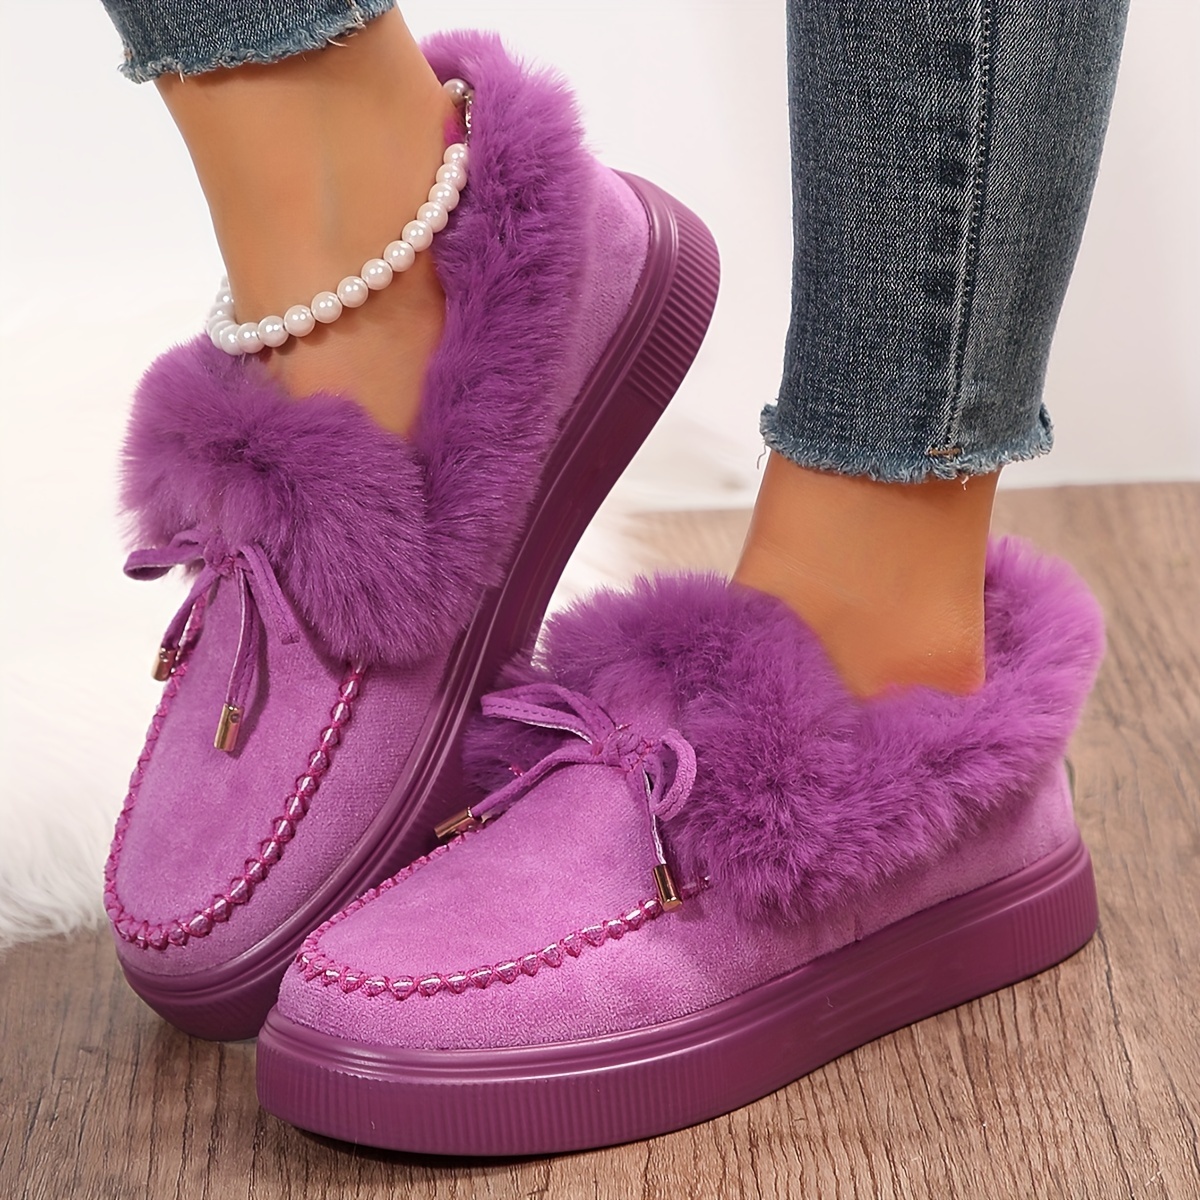 Women s Fluffy Fleece Lining Snow Boots Solid Color Bowknot Slip On Ankle Boots Cozy Winter Warm Flat Boots details 3